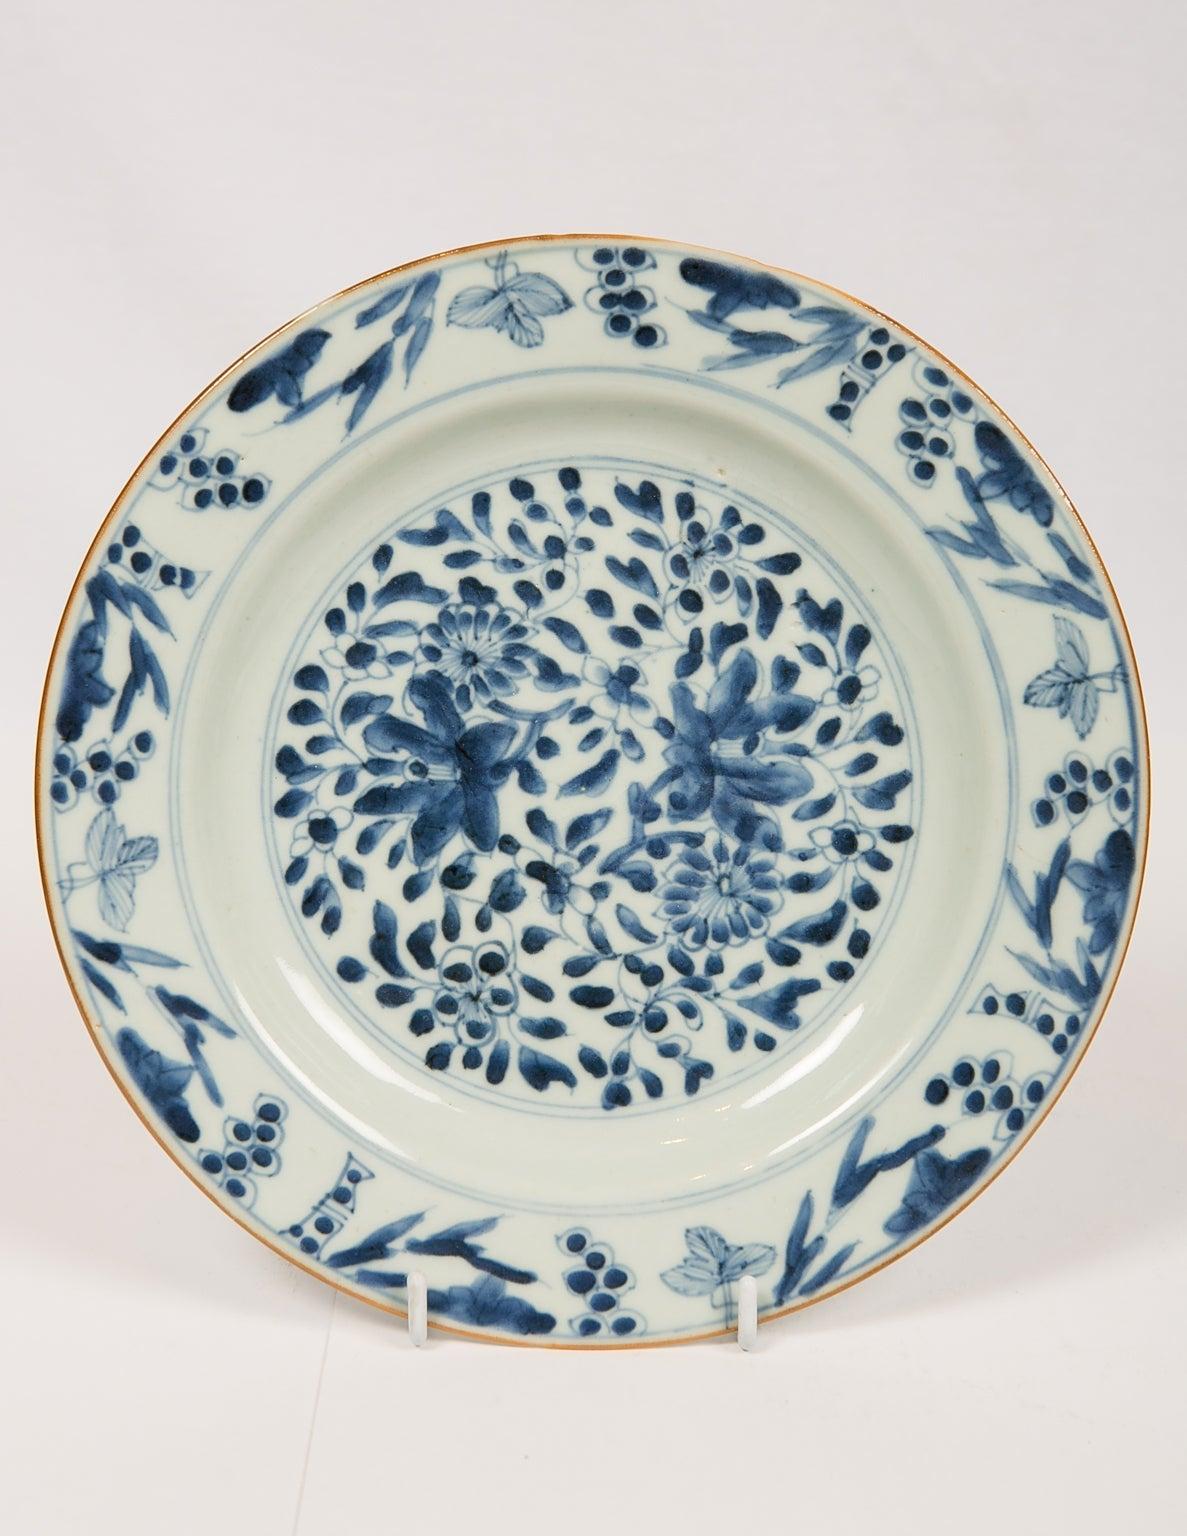 A group of eight Chinese blue and white dishes made in the 18th century during the Qianlong Reign, circa 1770. Made for export to Europe the dishes show a variety of floral patterns all decorated in a medium tone of cobalt blue. 
The plates work